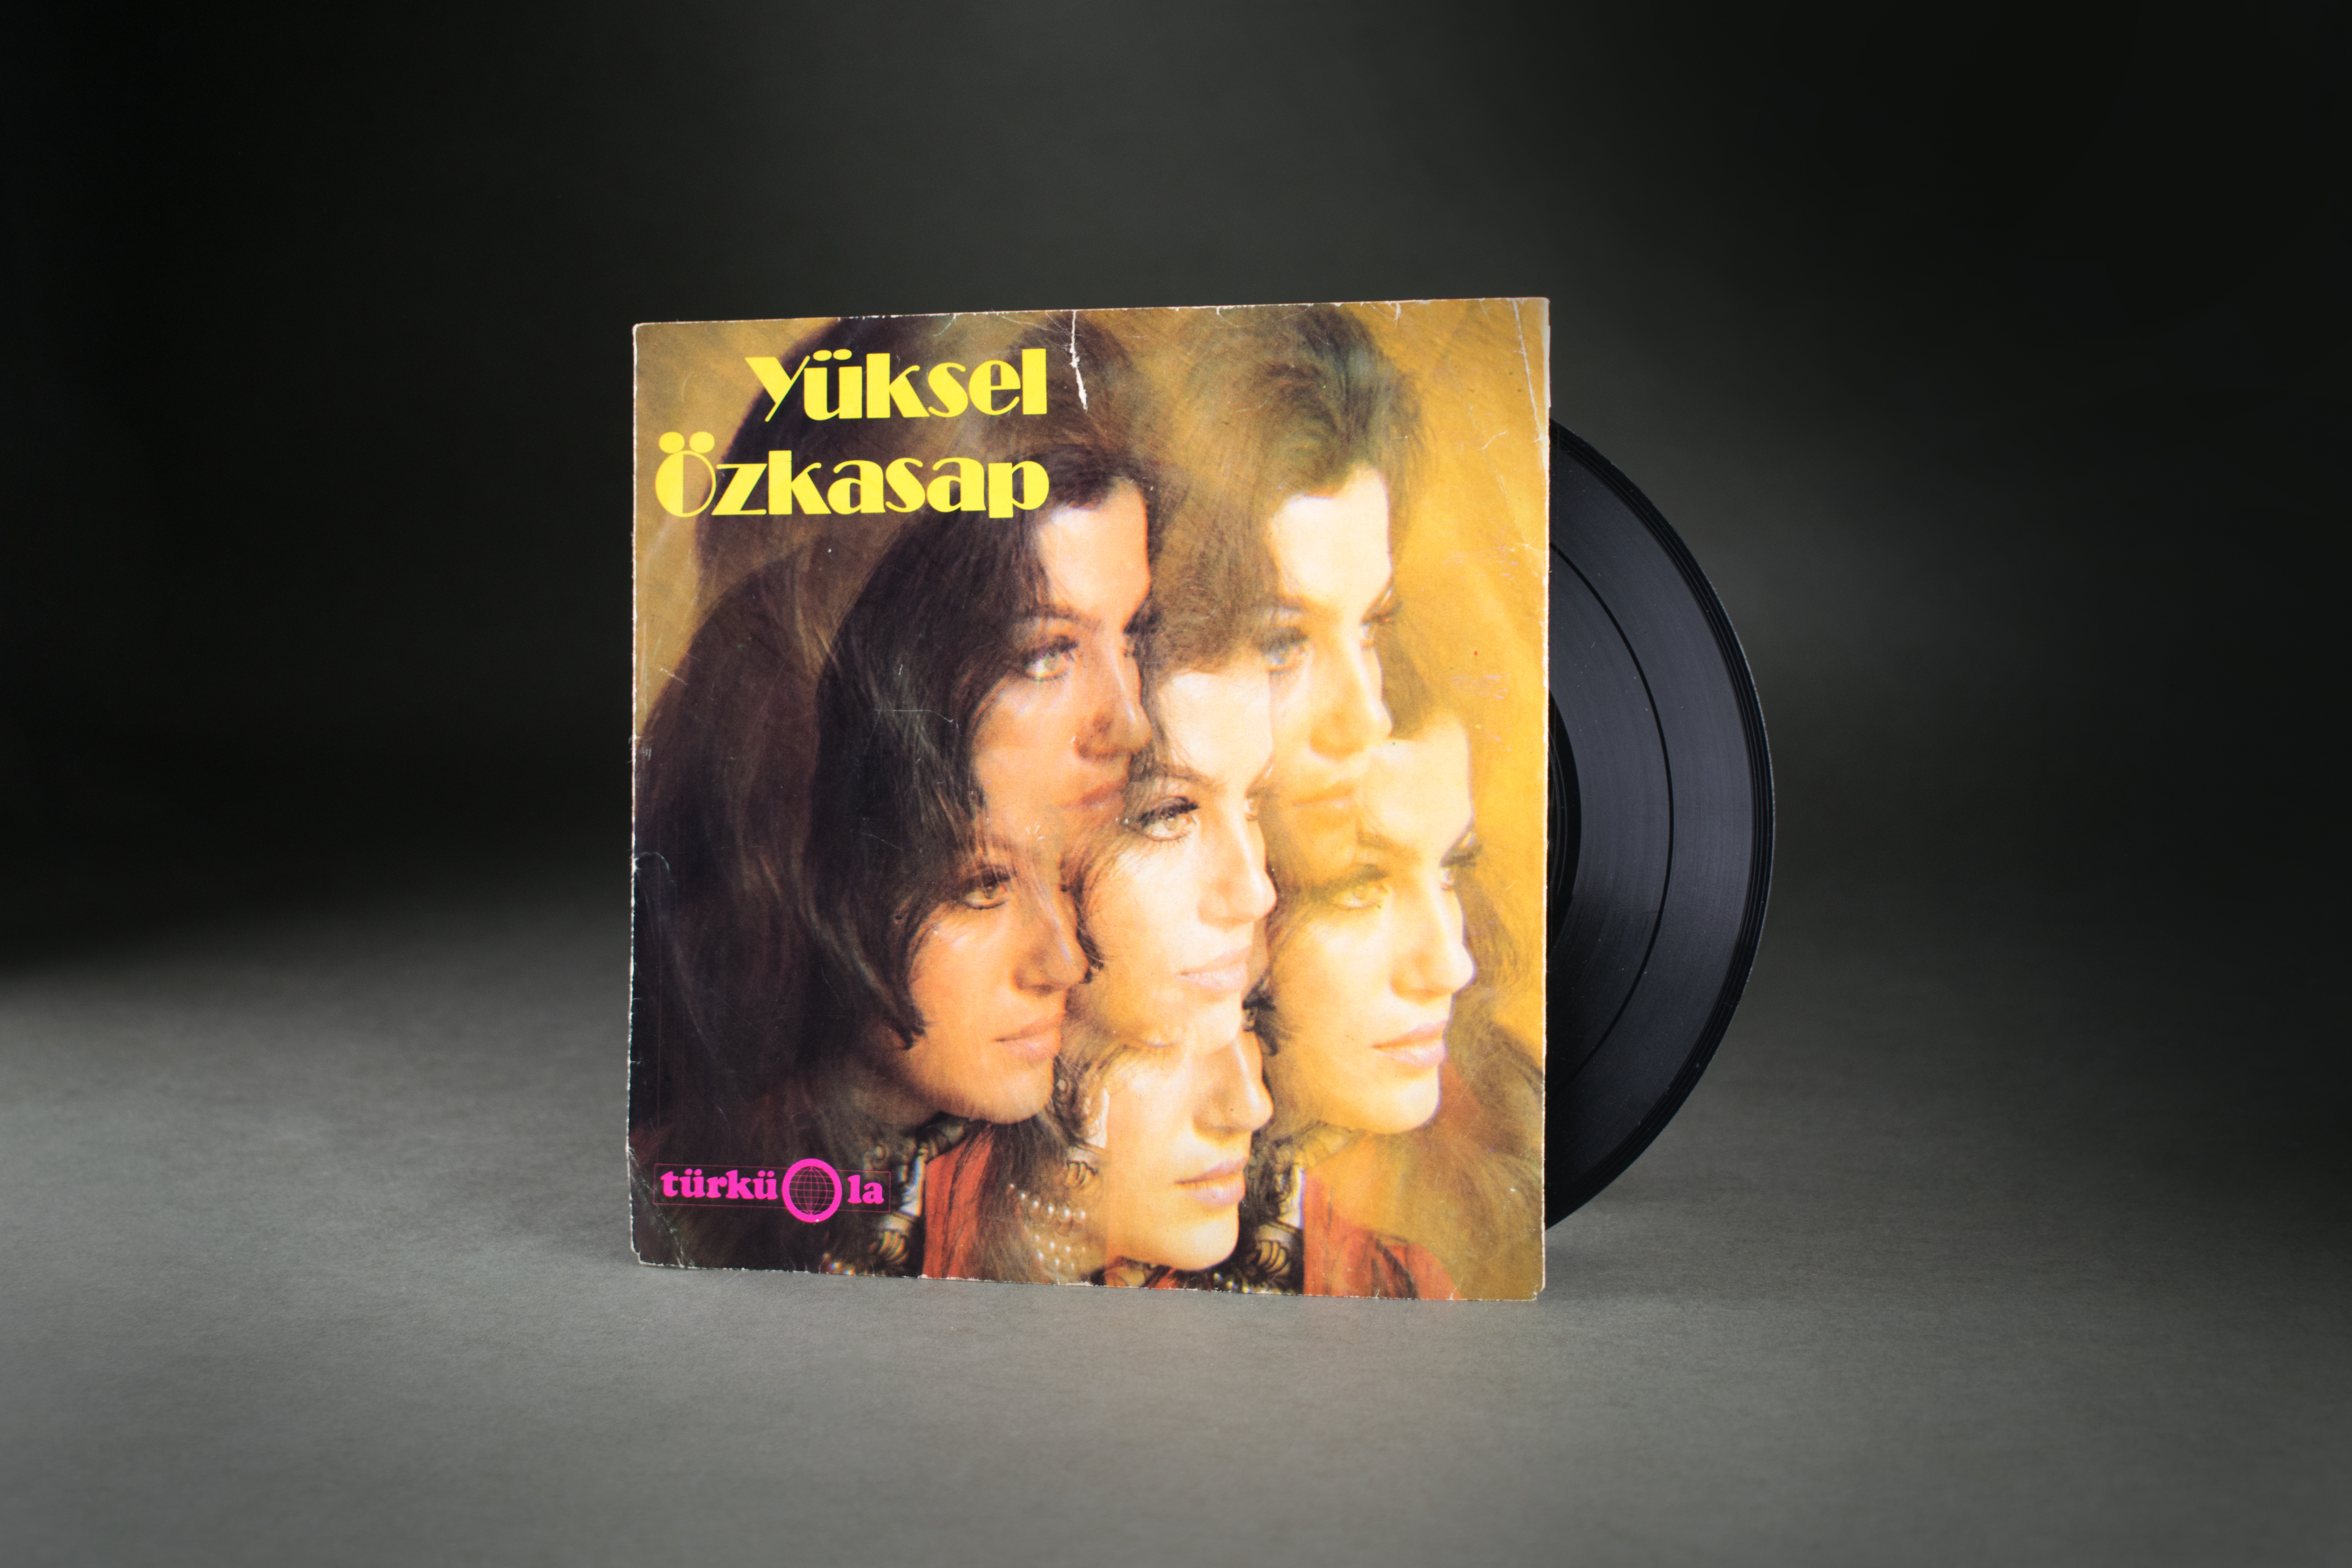 Single by Yüksel Özkasap on the Türküola label, 1968: Yüksel Özkasap came to Velbert as a factory worker and worked in the Stannay key factory, where she also started to sing. This resulted in a music career that earned her the nickname "Köln Bülbülü" ("Nightingale of Cologne") from her fans. Özkasap sang around 500 "Gurbet Türküleri" ("Folk Songs from a Foreign Country") and released over 20 albums. DOMiD archive, Cologne, SD 0130 000